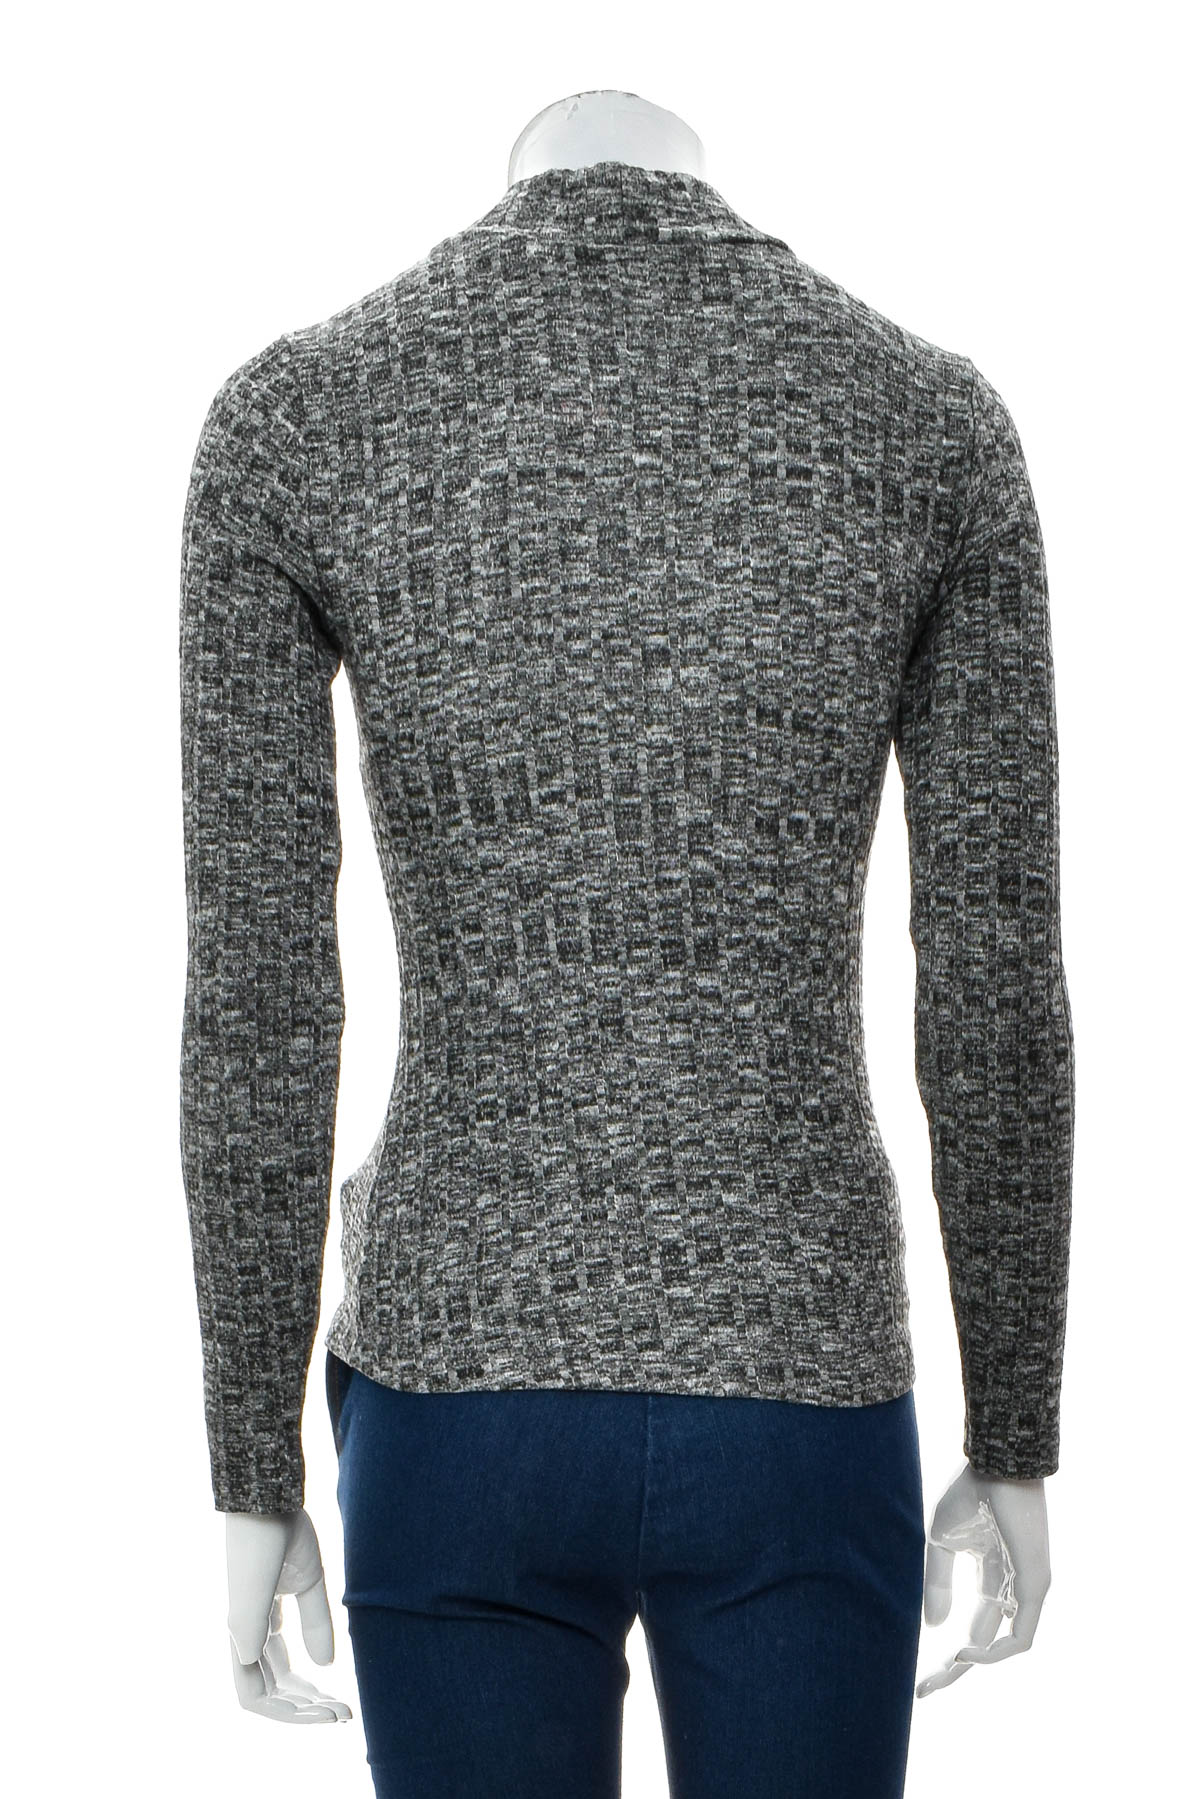 Women's sweater - ONLY - 1